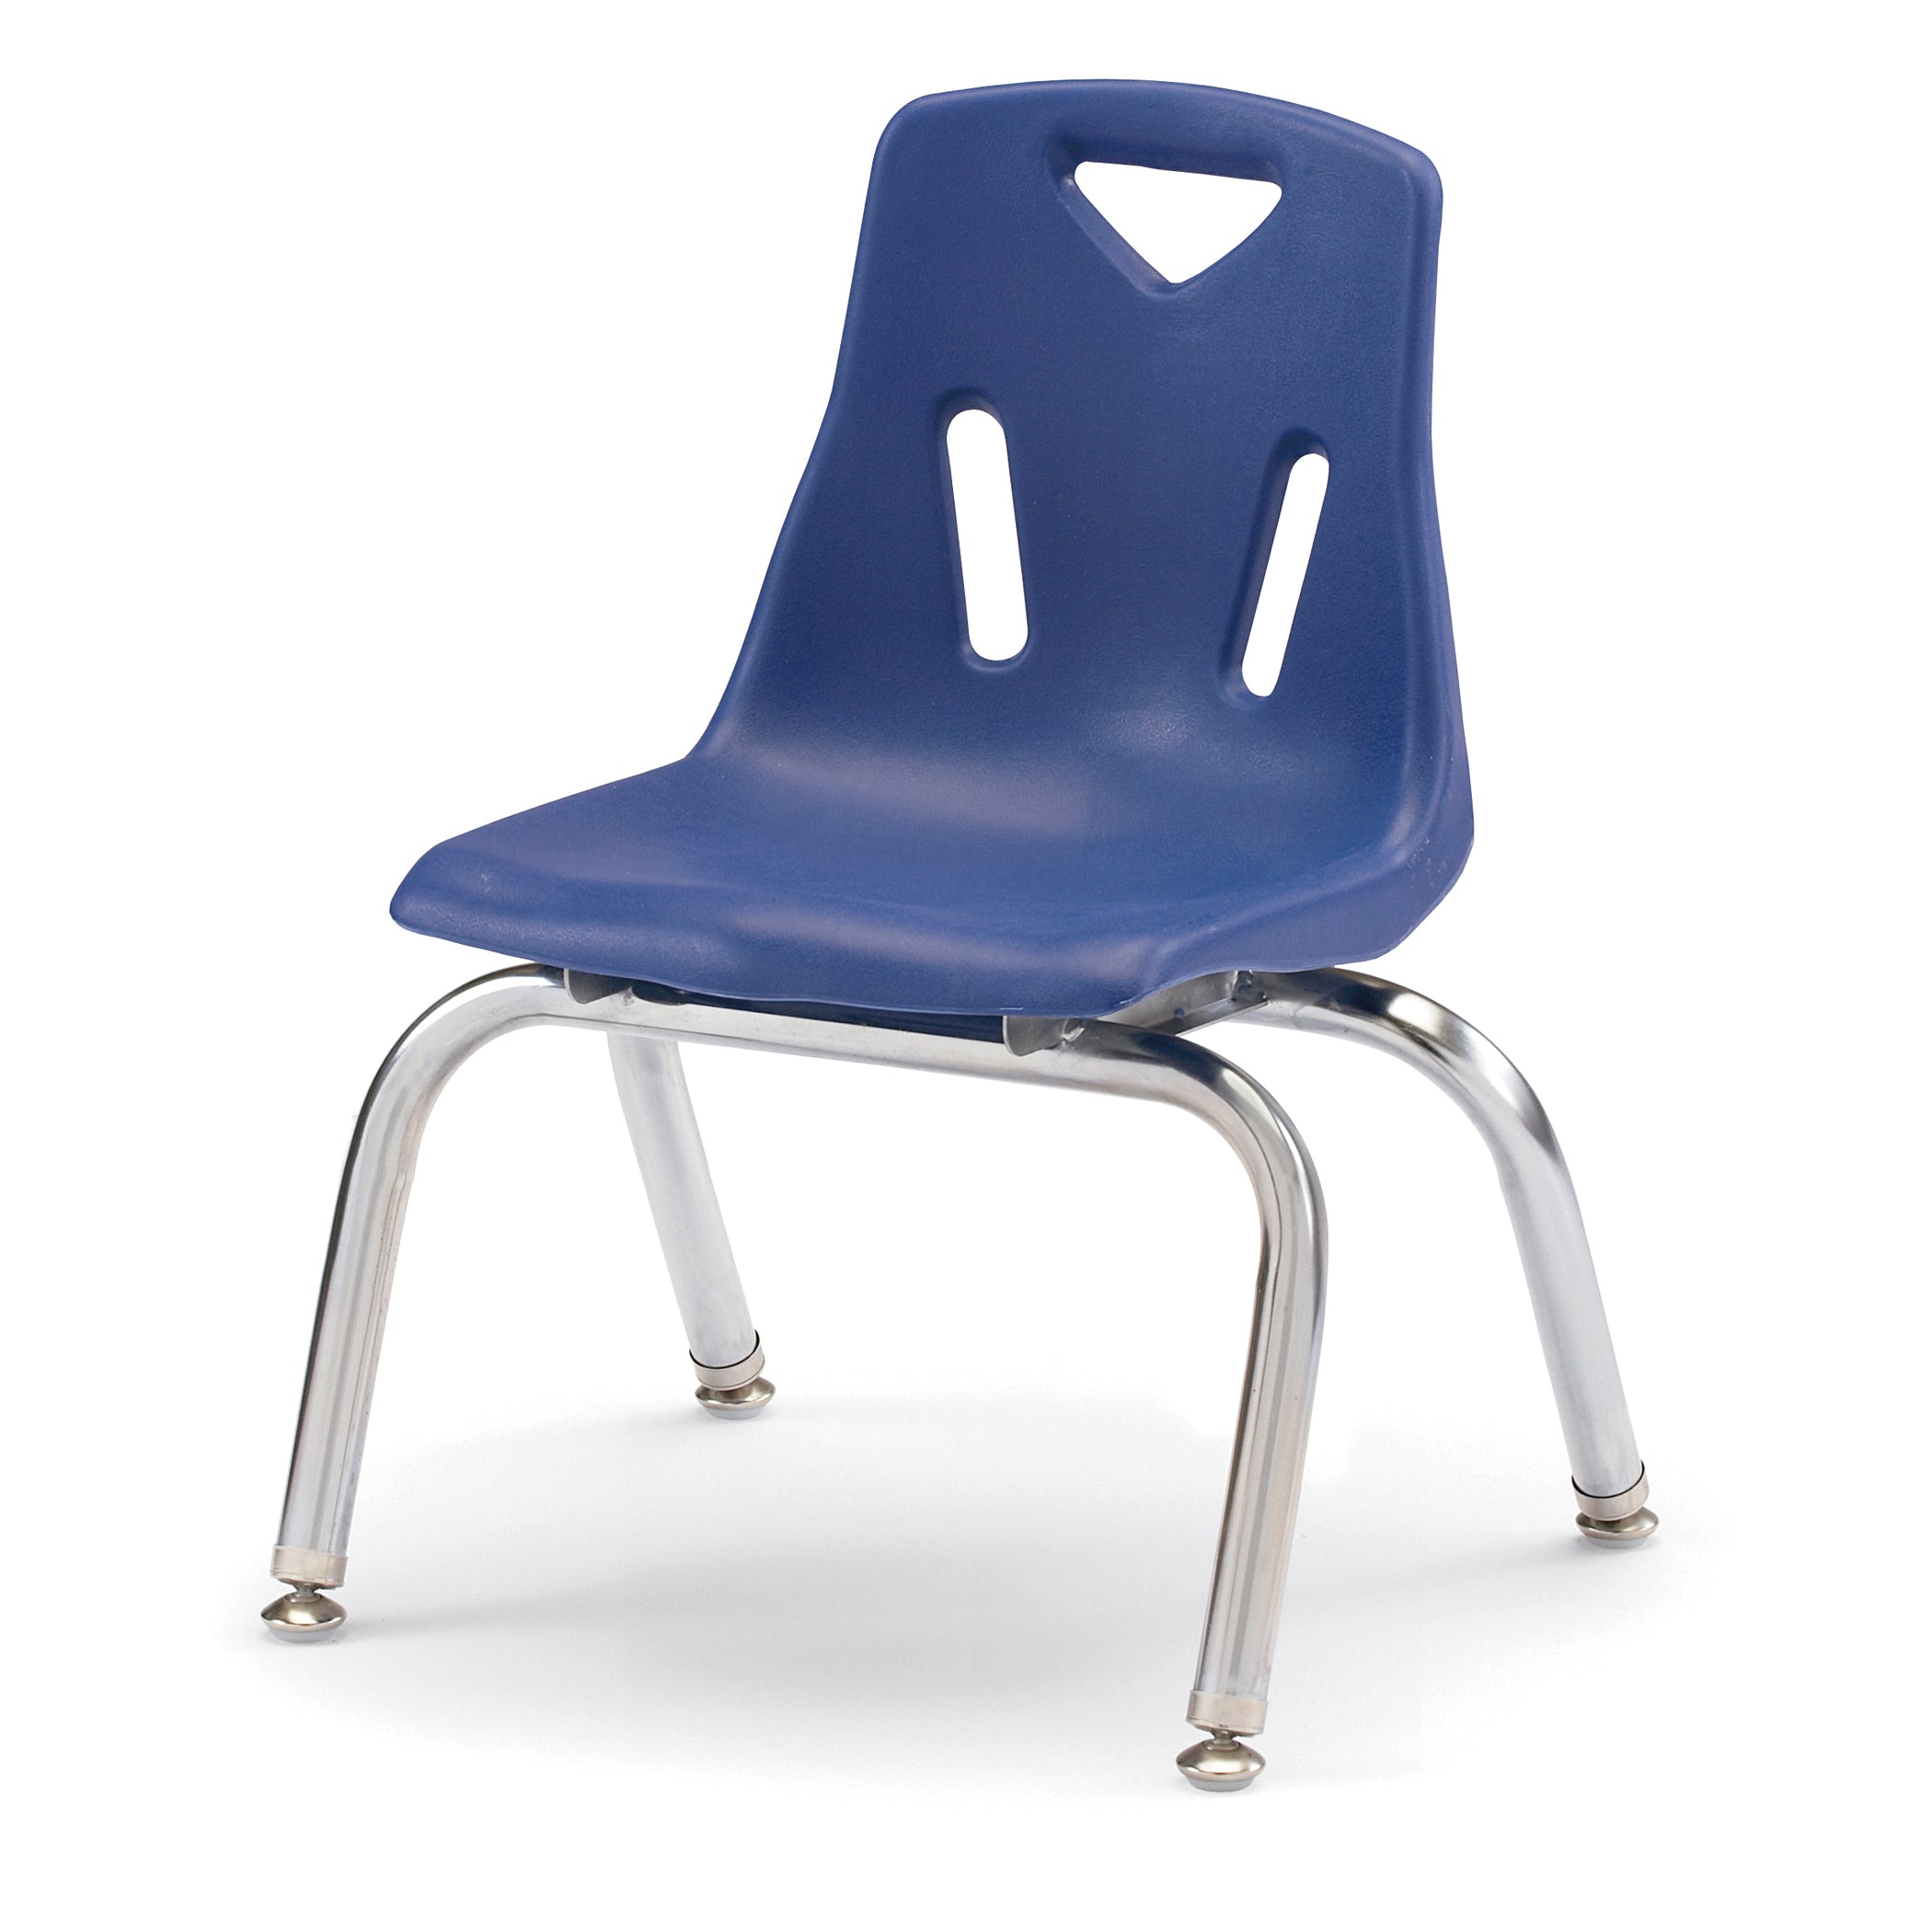 8140JC1003, Berries Stacking Chair with Chrome-Plated Legs - 10" Ht - Blue